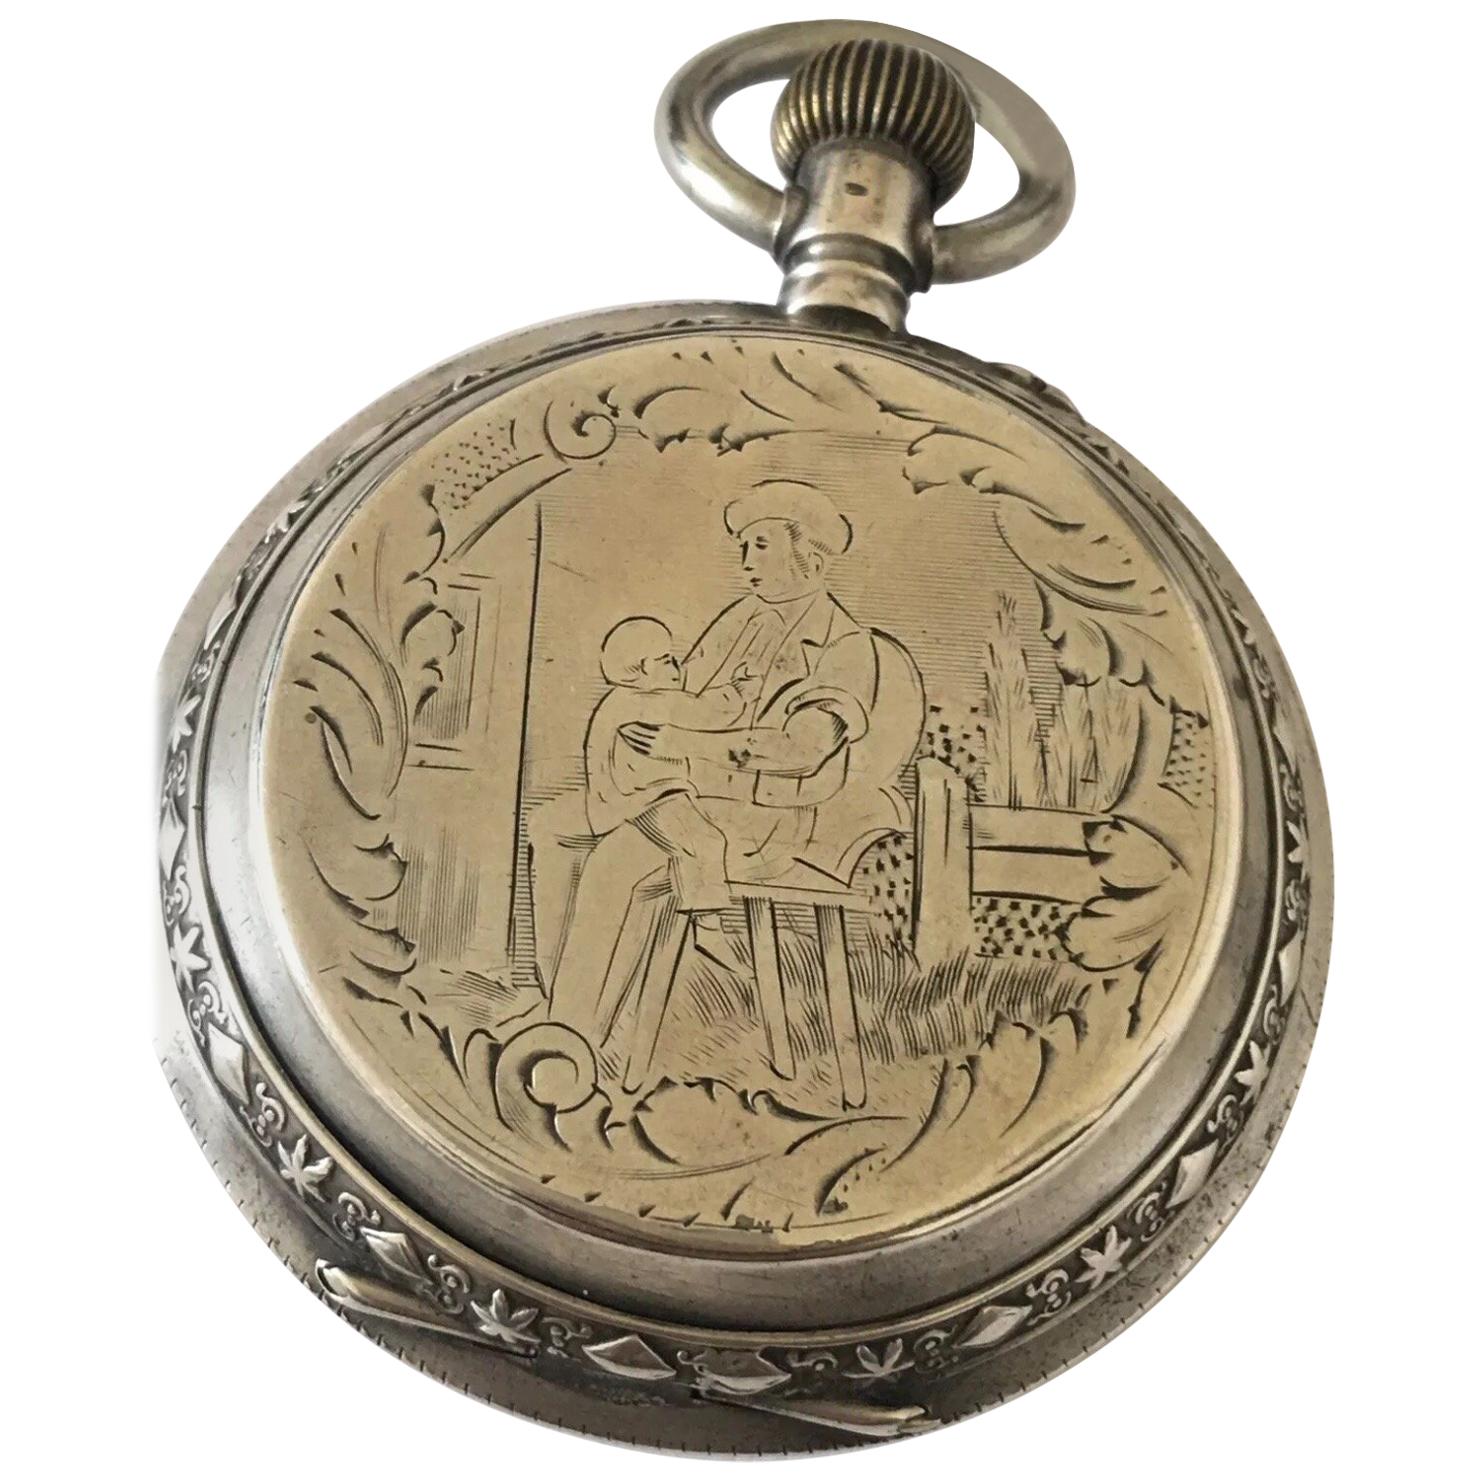 Antique Beautifully Engraved Full Hunter Cased Silver Pocket Watch.


This beautiful 56mm antique silver full hunter pocket watch is in good working condition and ticking nicely. Visible signs of ageing and wear with small and light surface marks on